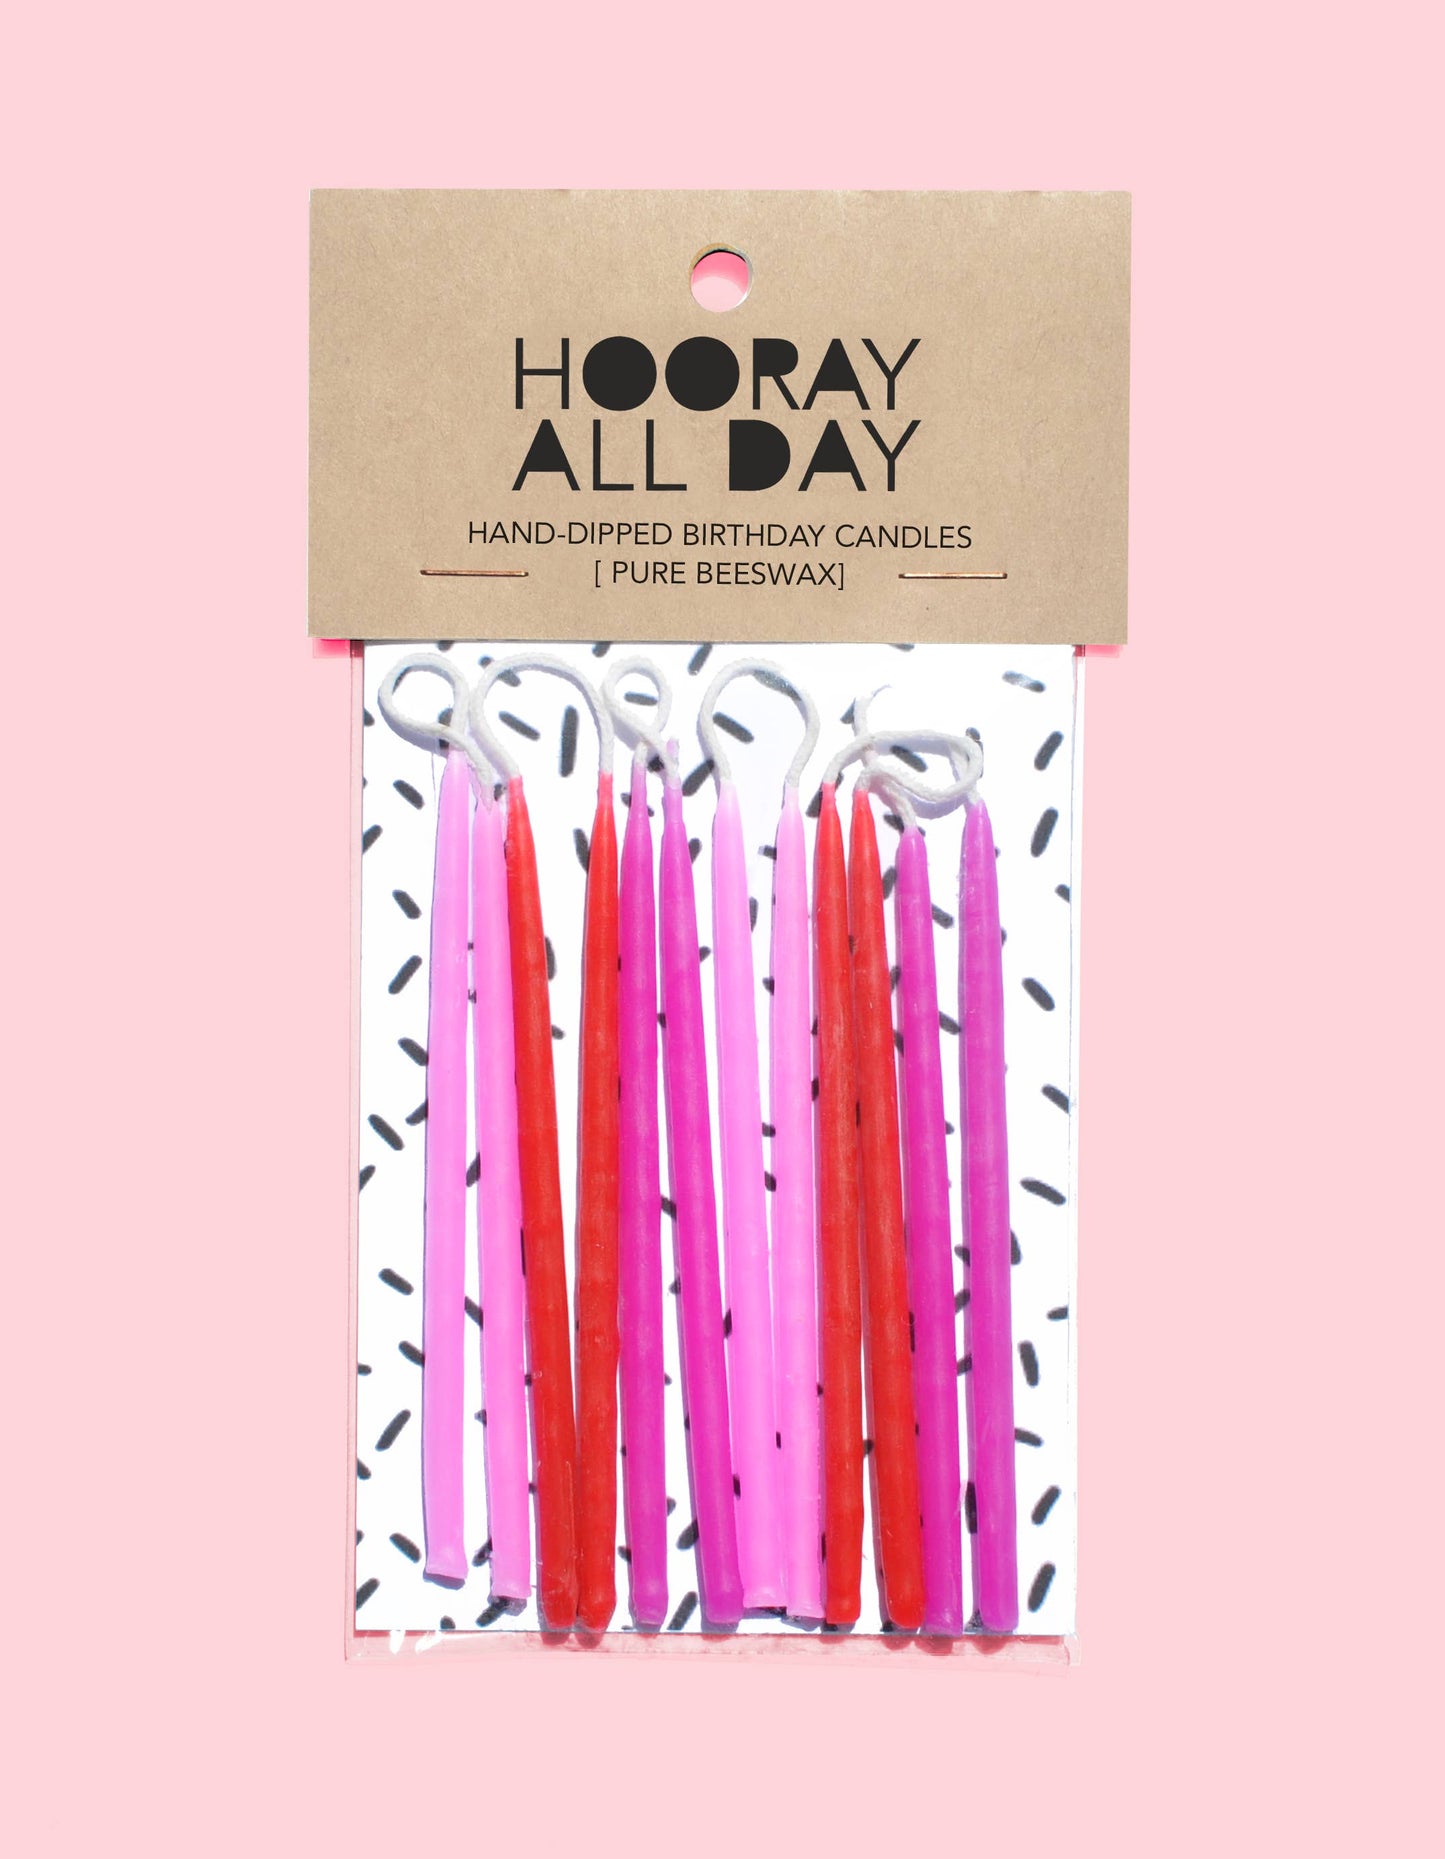 100% Beeswax Hand-Dipped Birthday Candles: Blues